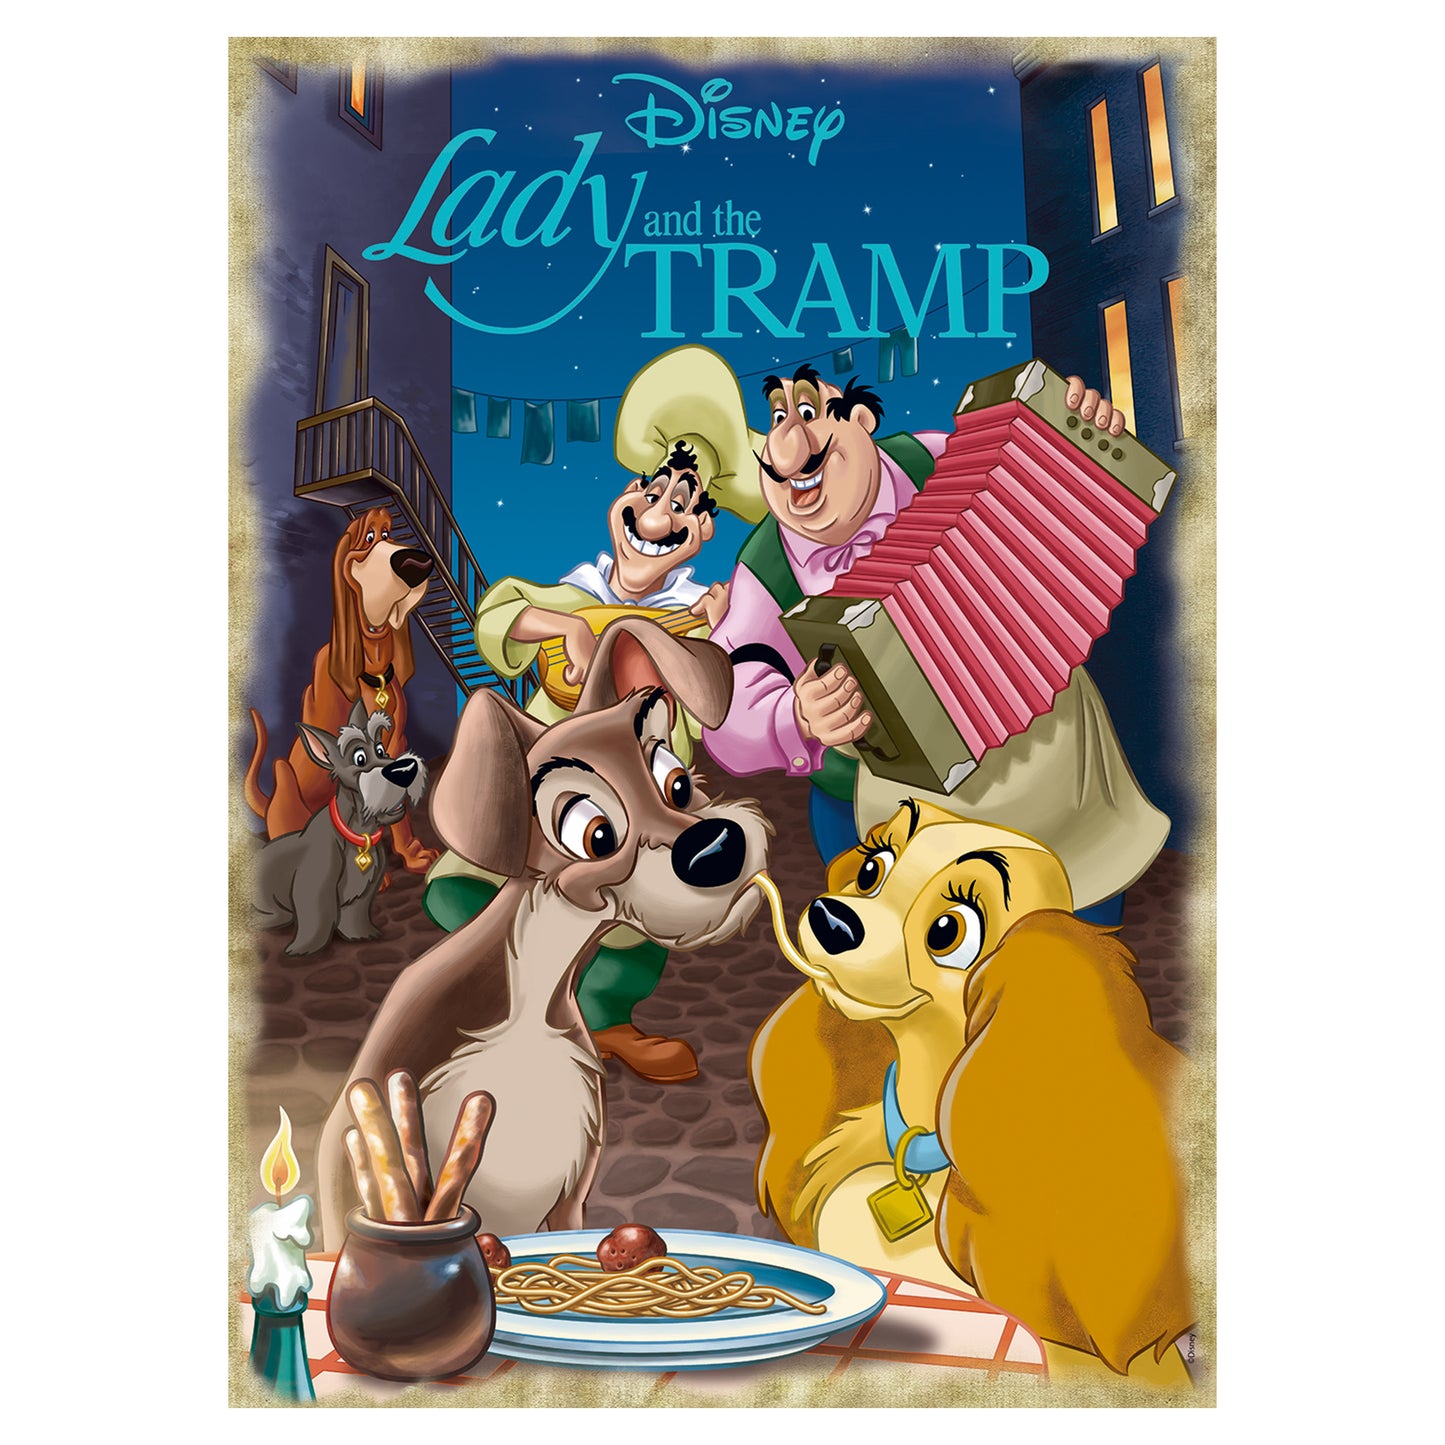 **Disney Classic Collection Lady & The Tramp 1000pcs - product image - Jumboplay.com